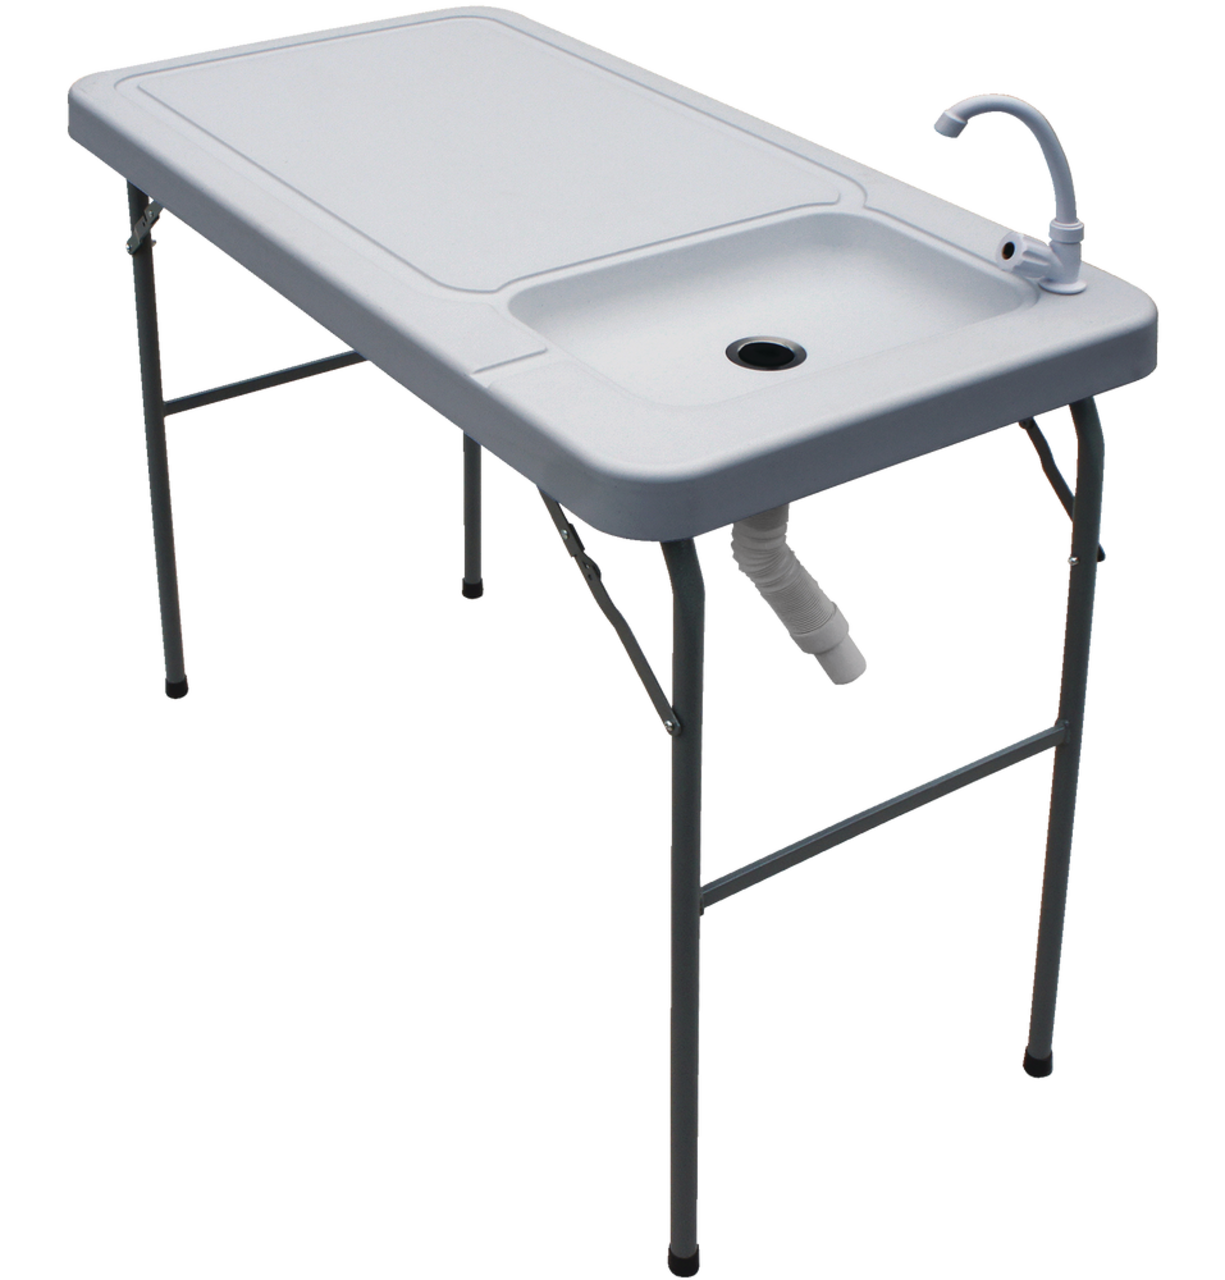 PDG Outdoor Portable Fish & Game Cleaning Table with Built-In Sink